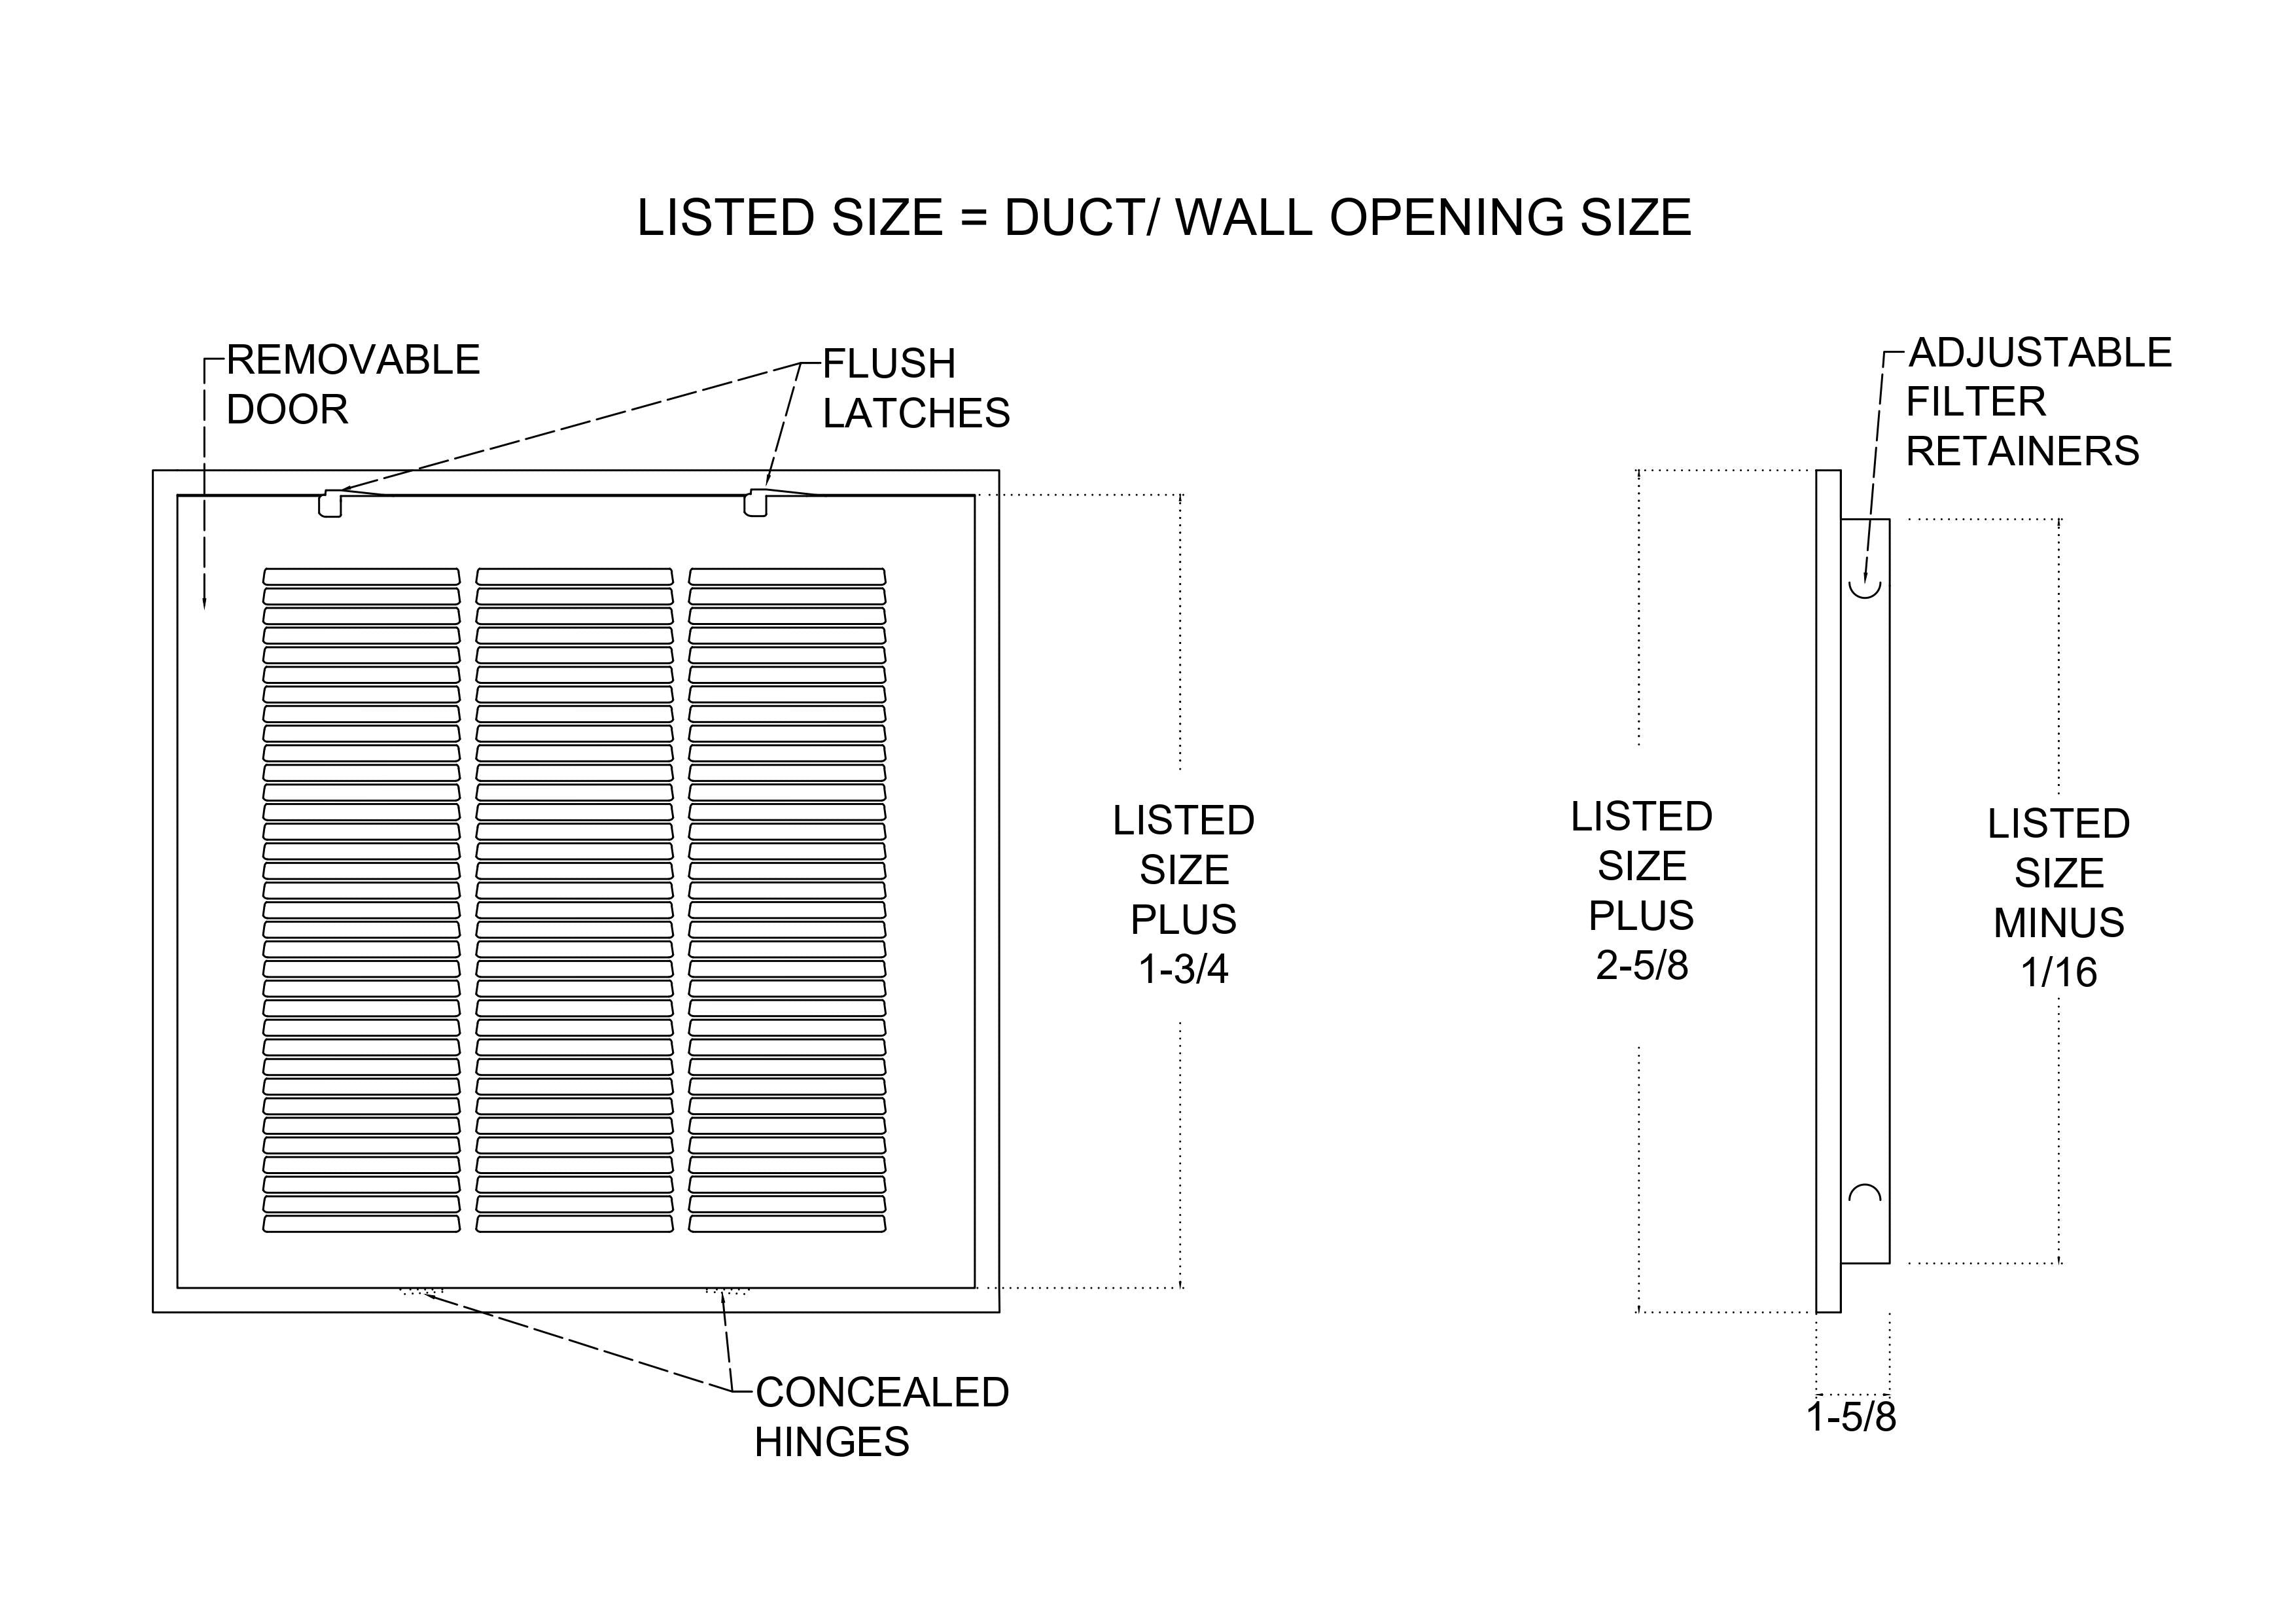 14" X 24" Duct Opening | Filter Included HD Steel Return Air Filter Grille for Sidewall and Ceiling